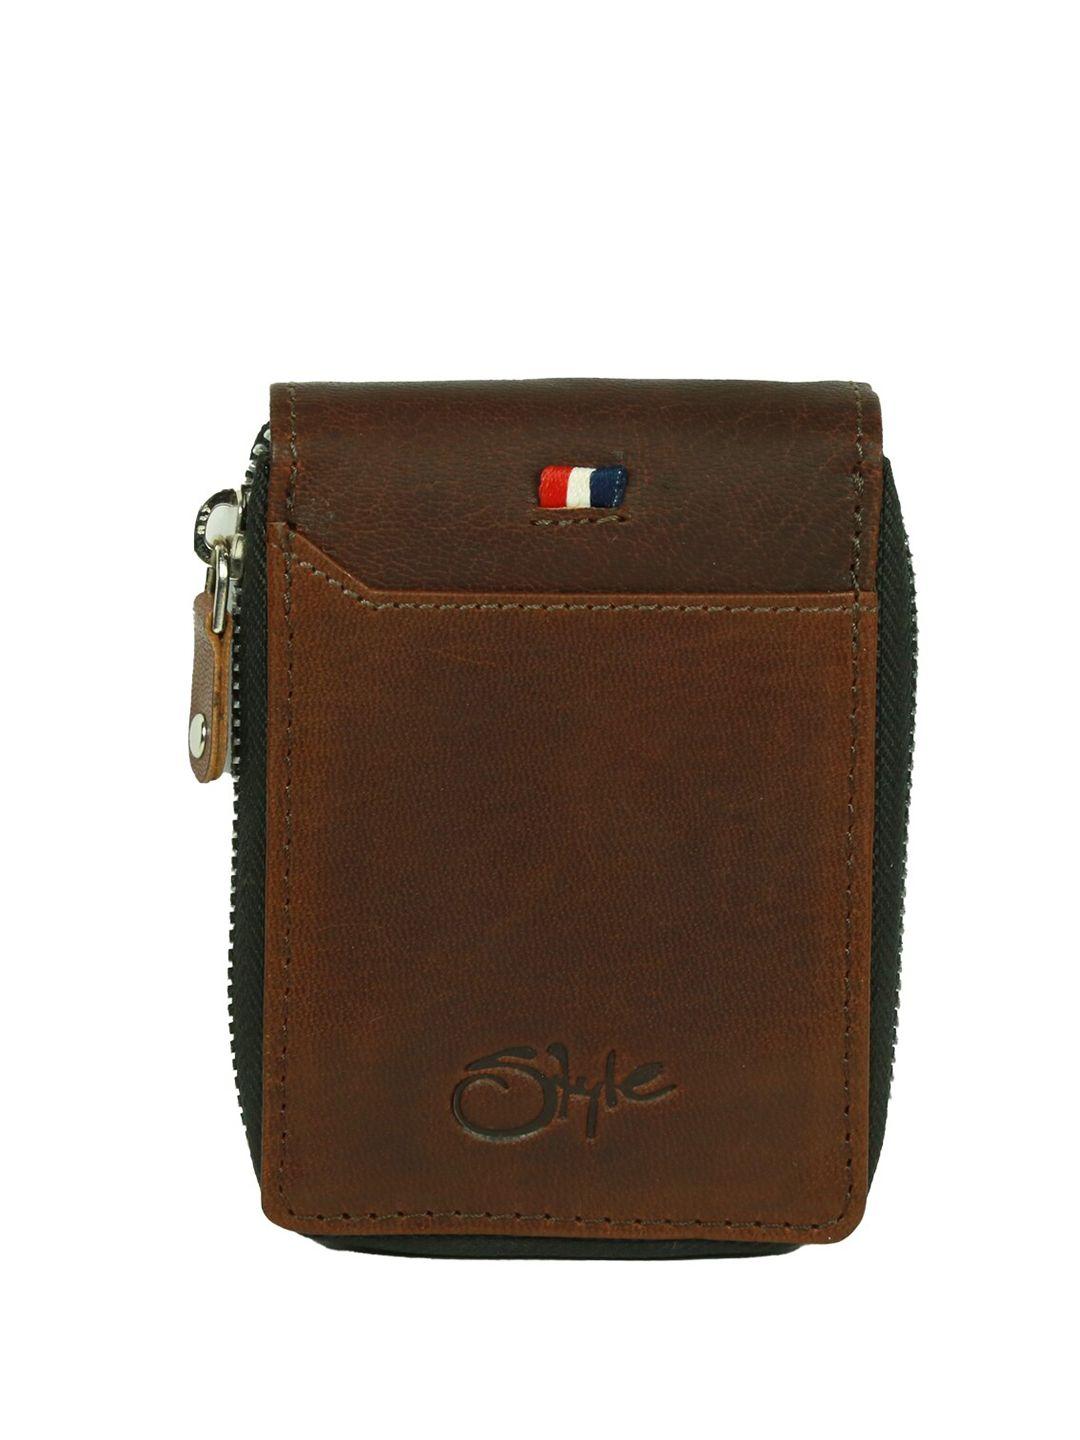 style shoes unisex brown leather card holder